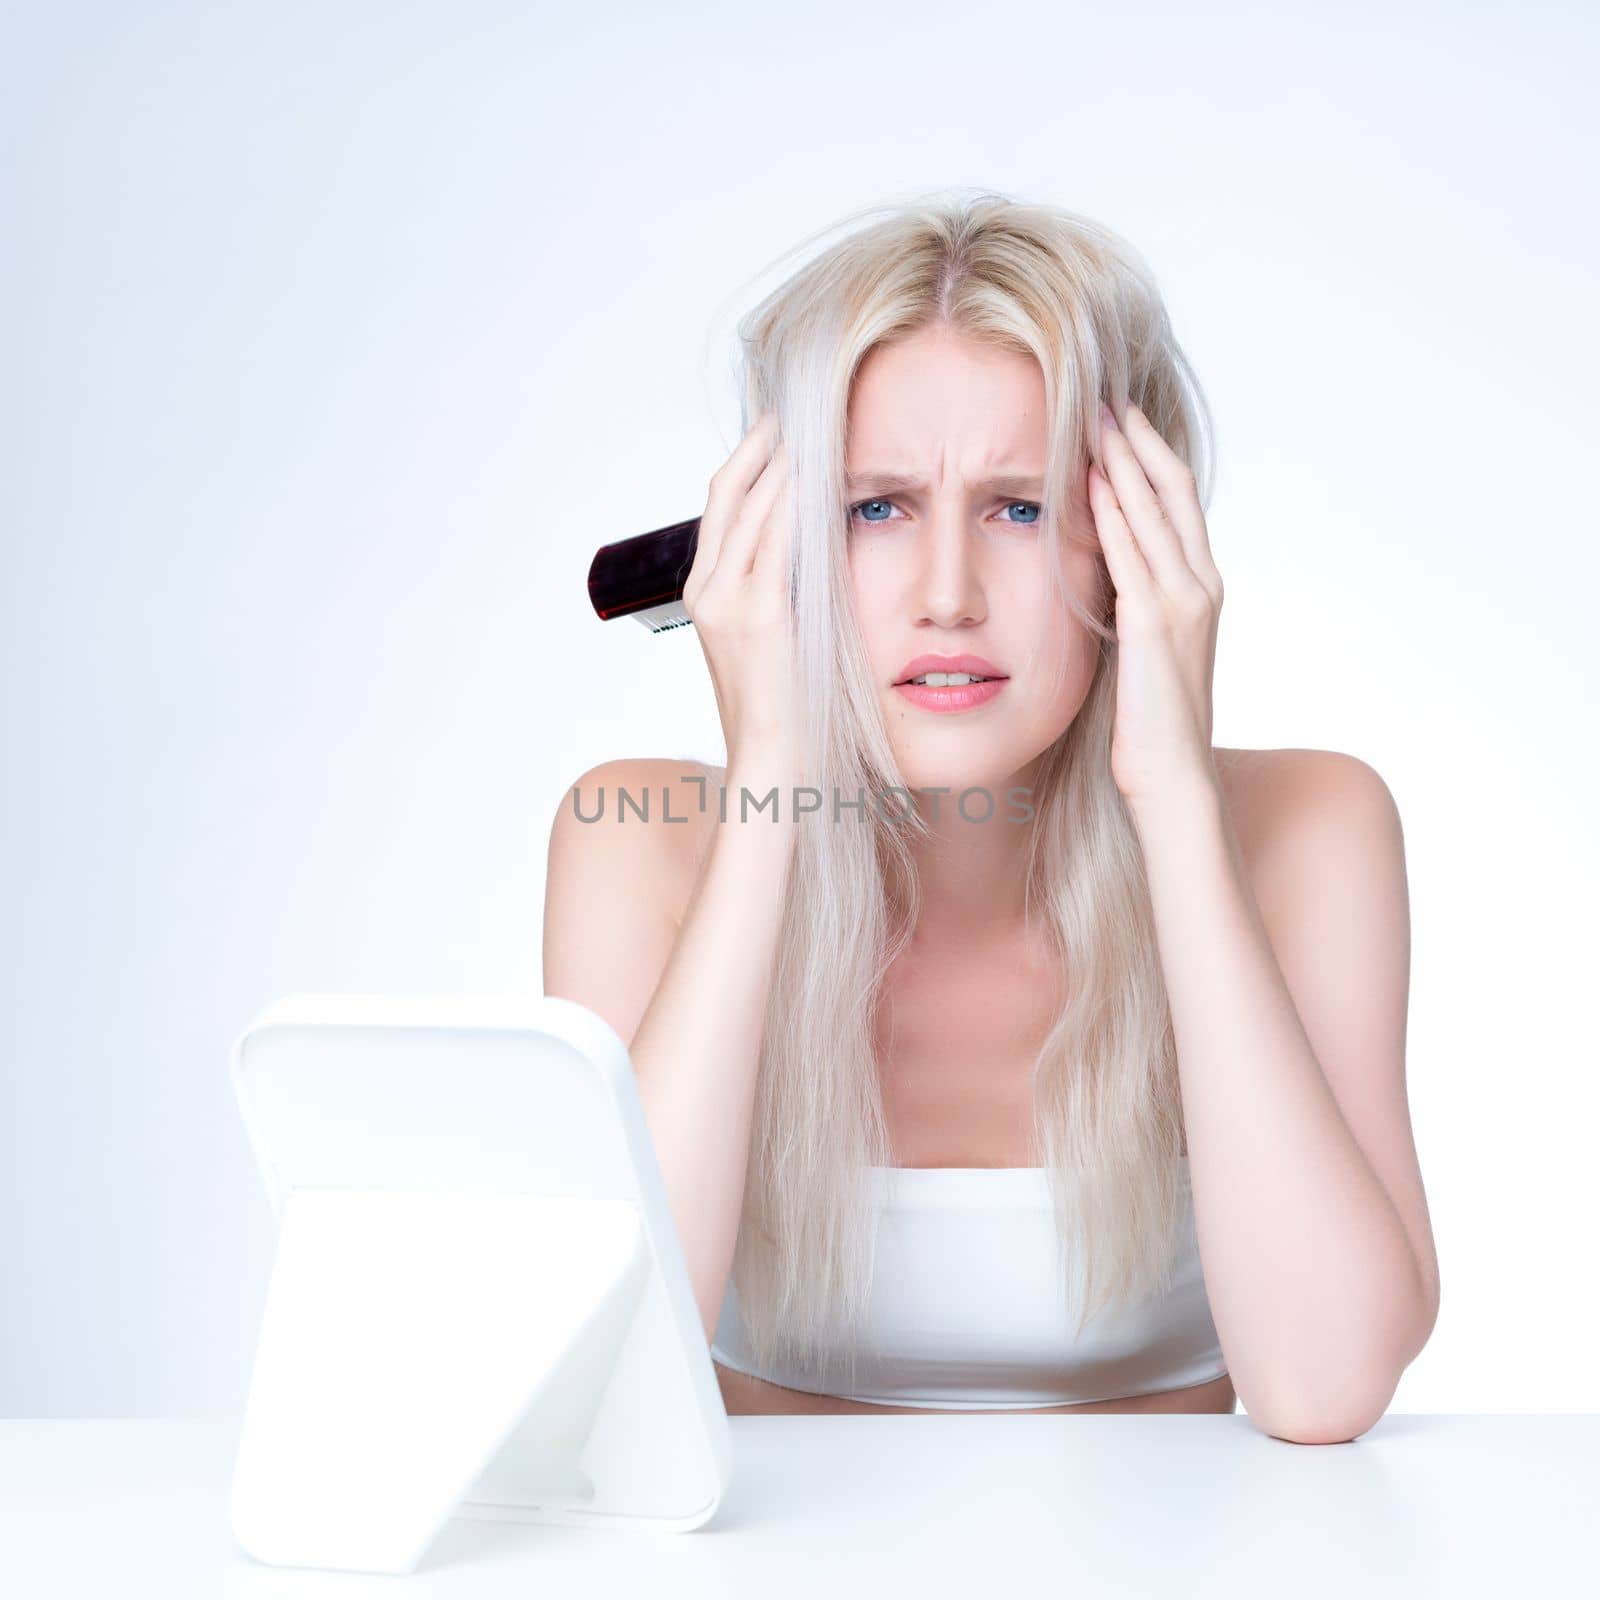 Personable beauty fresh clean skin woman having dry hair problem. Frustrated facial expression concept of damaged hair loss for shampoo ads in copyspace isolated background.